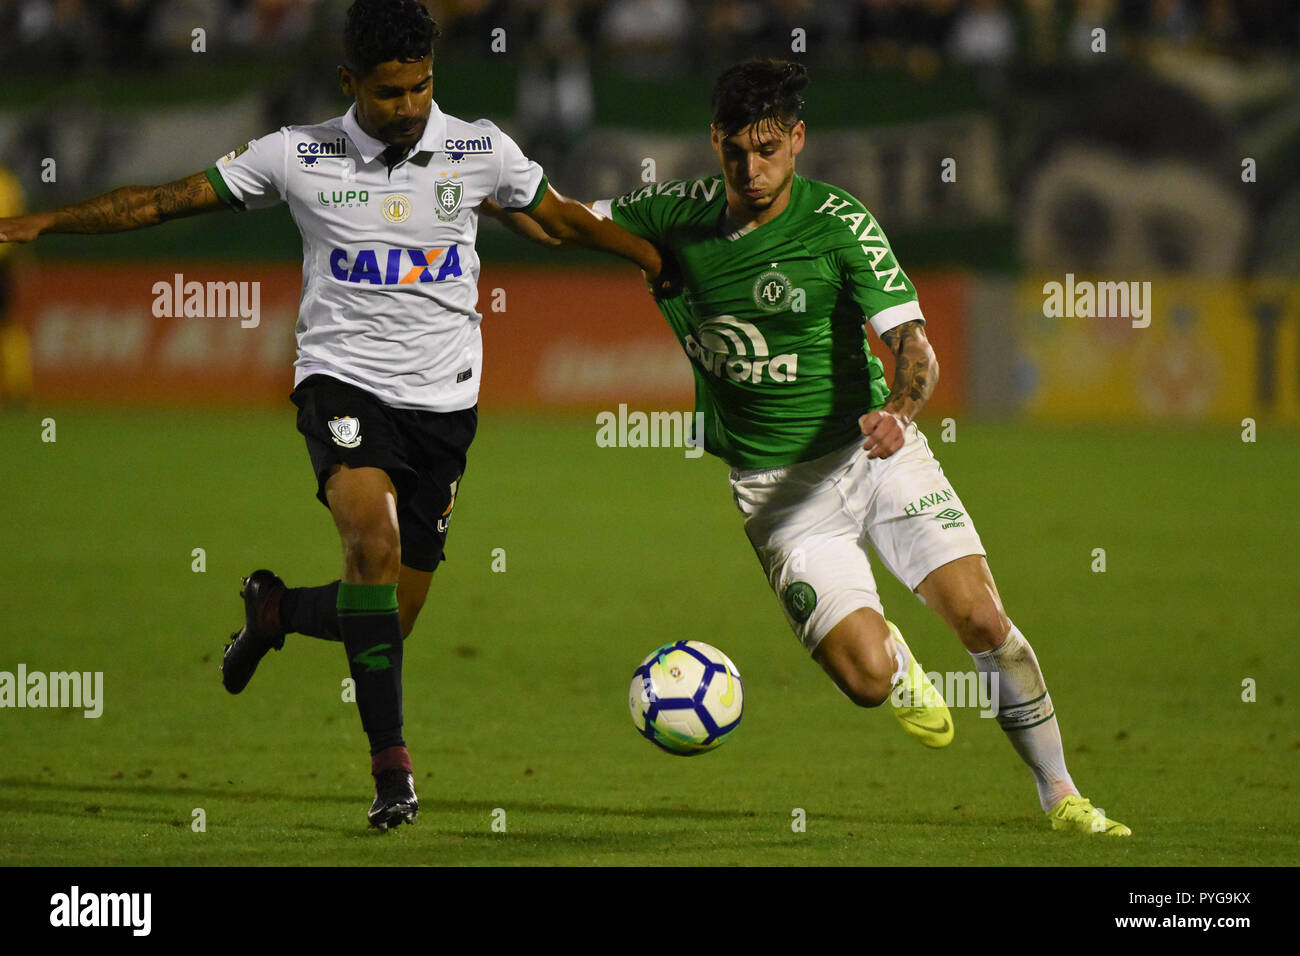 SC - Chapeco - 27/10/2018 - Brazilian A 2018, Chapecoense x Am rica-MG - Chapecoense player Doffo is bidding with Aderlan player of America-MG during a match at the Arena Conde stadium for the Brazilian championship A 2018. Photo: Renato Padilha / AGIF Stock Photo